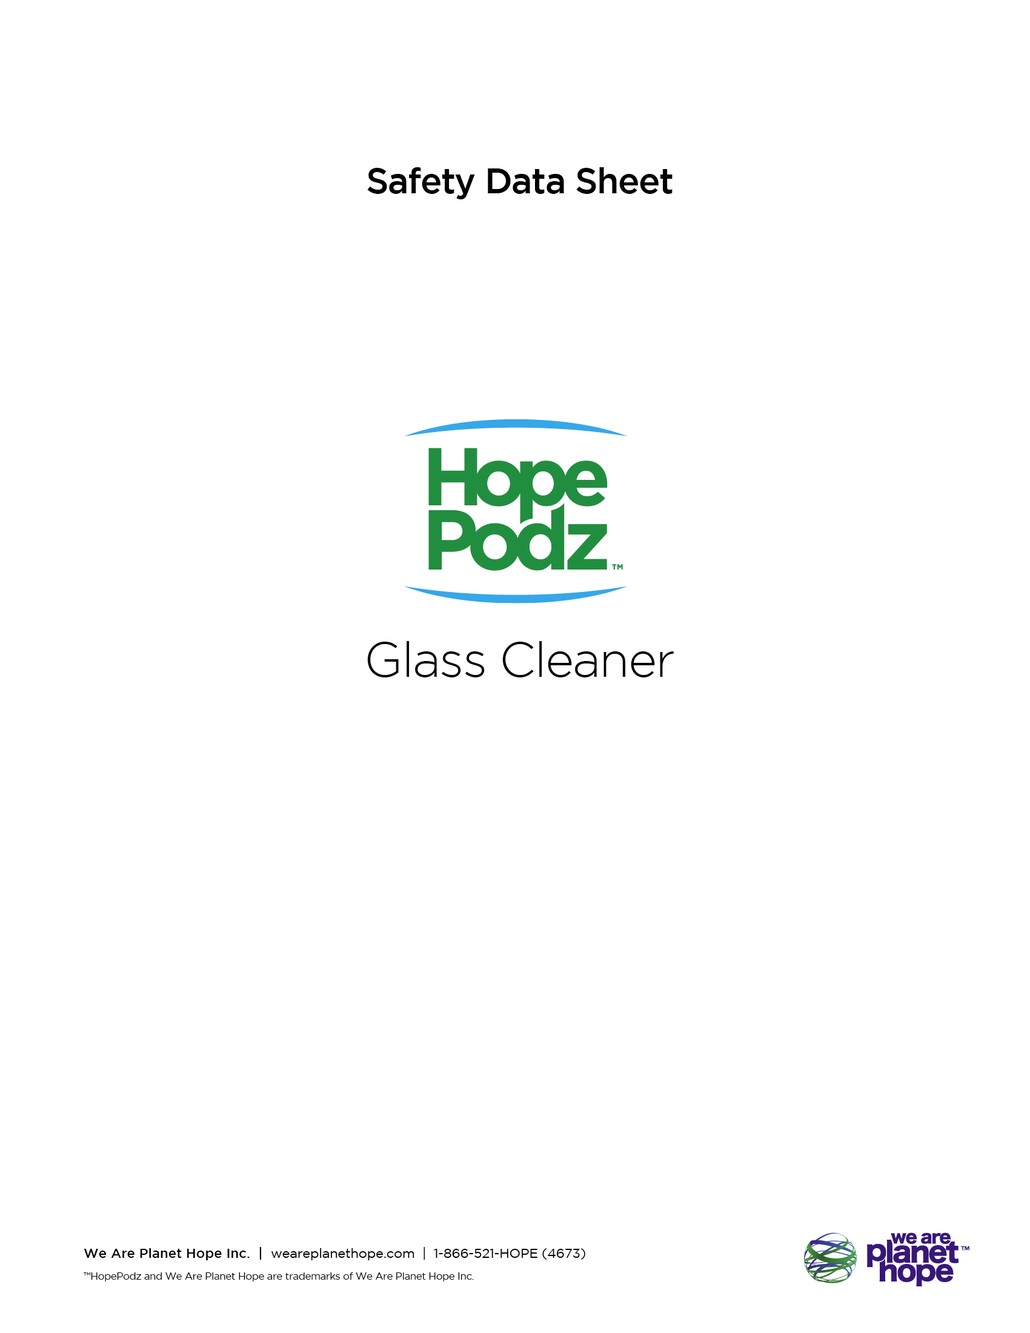 Glass Cleaner Safety Sheet